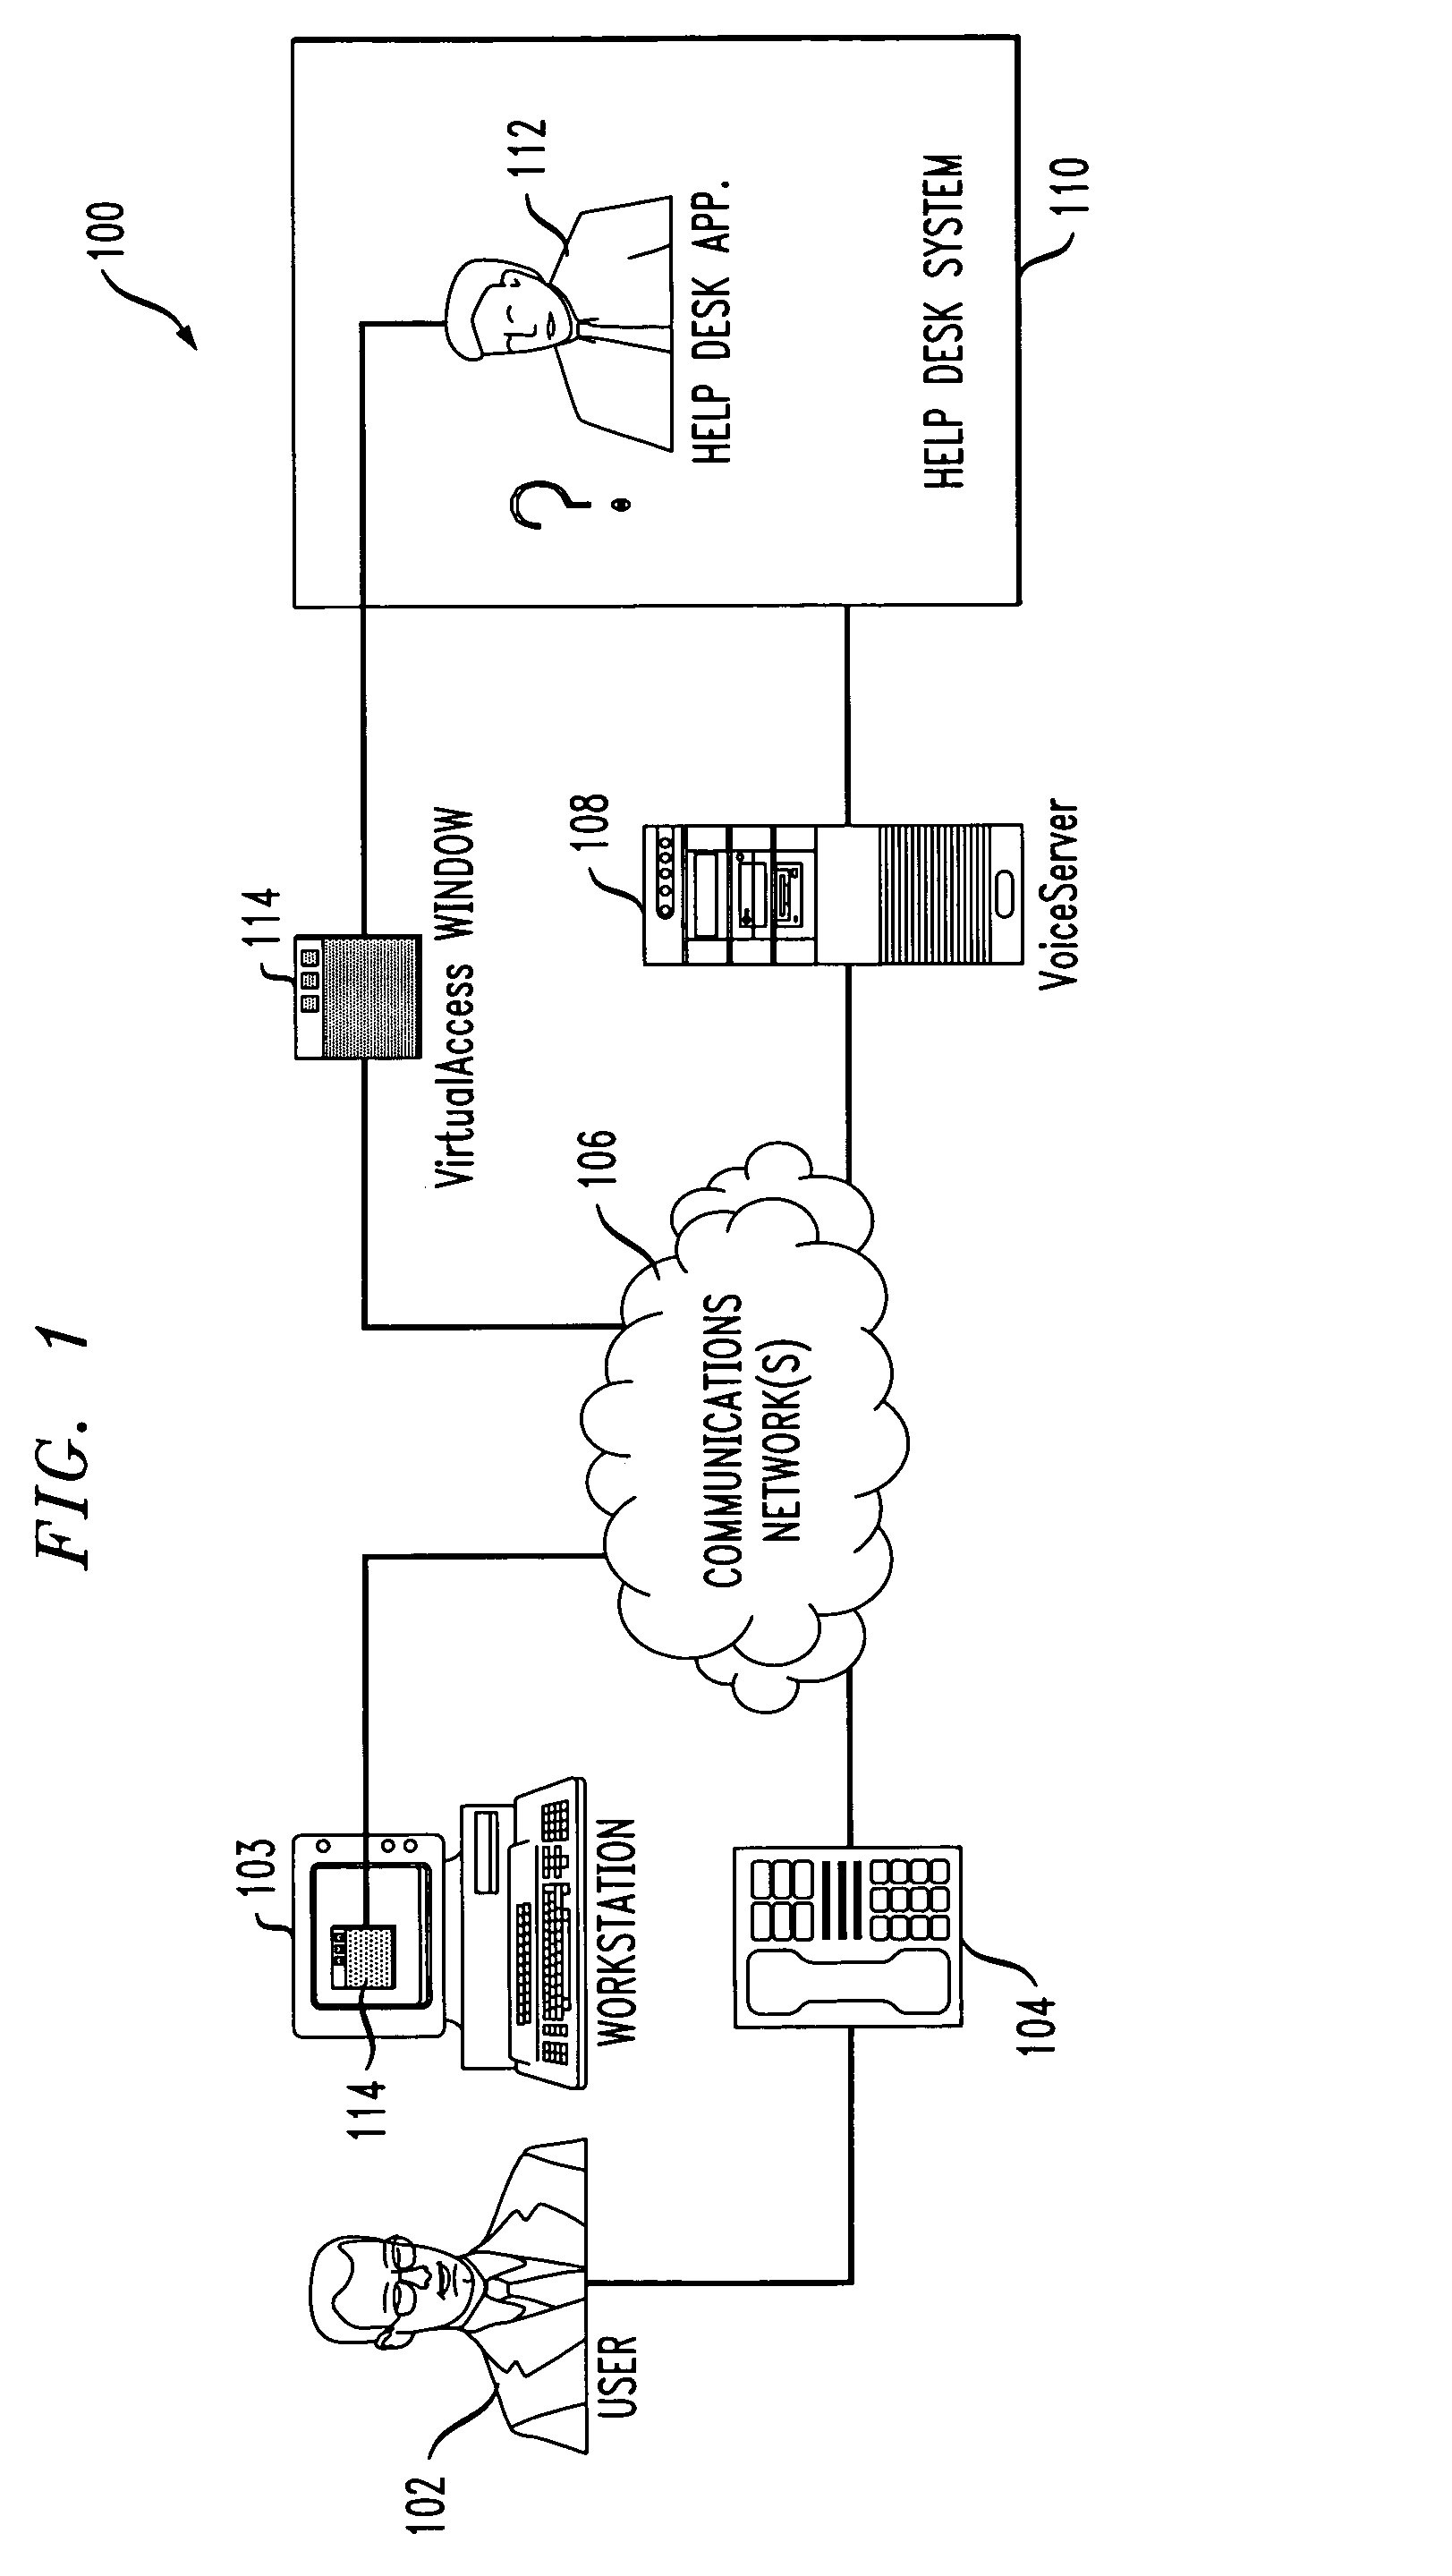 Apparatus and method for addressing computer-related problems